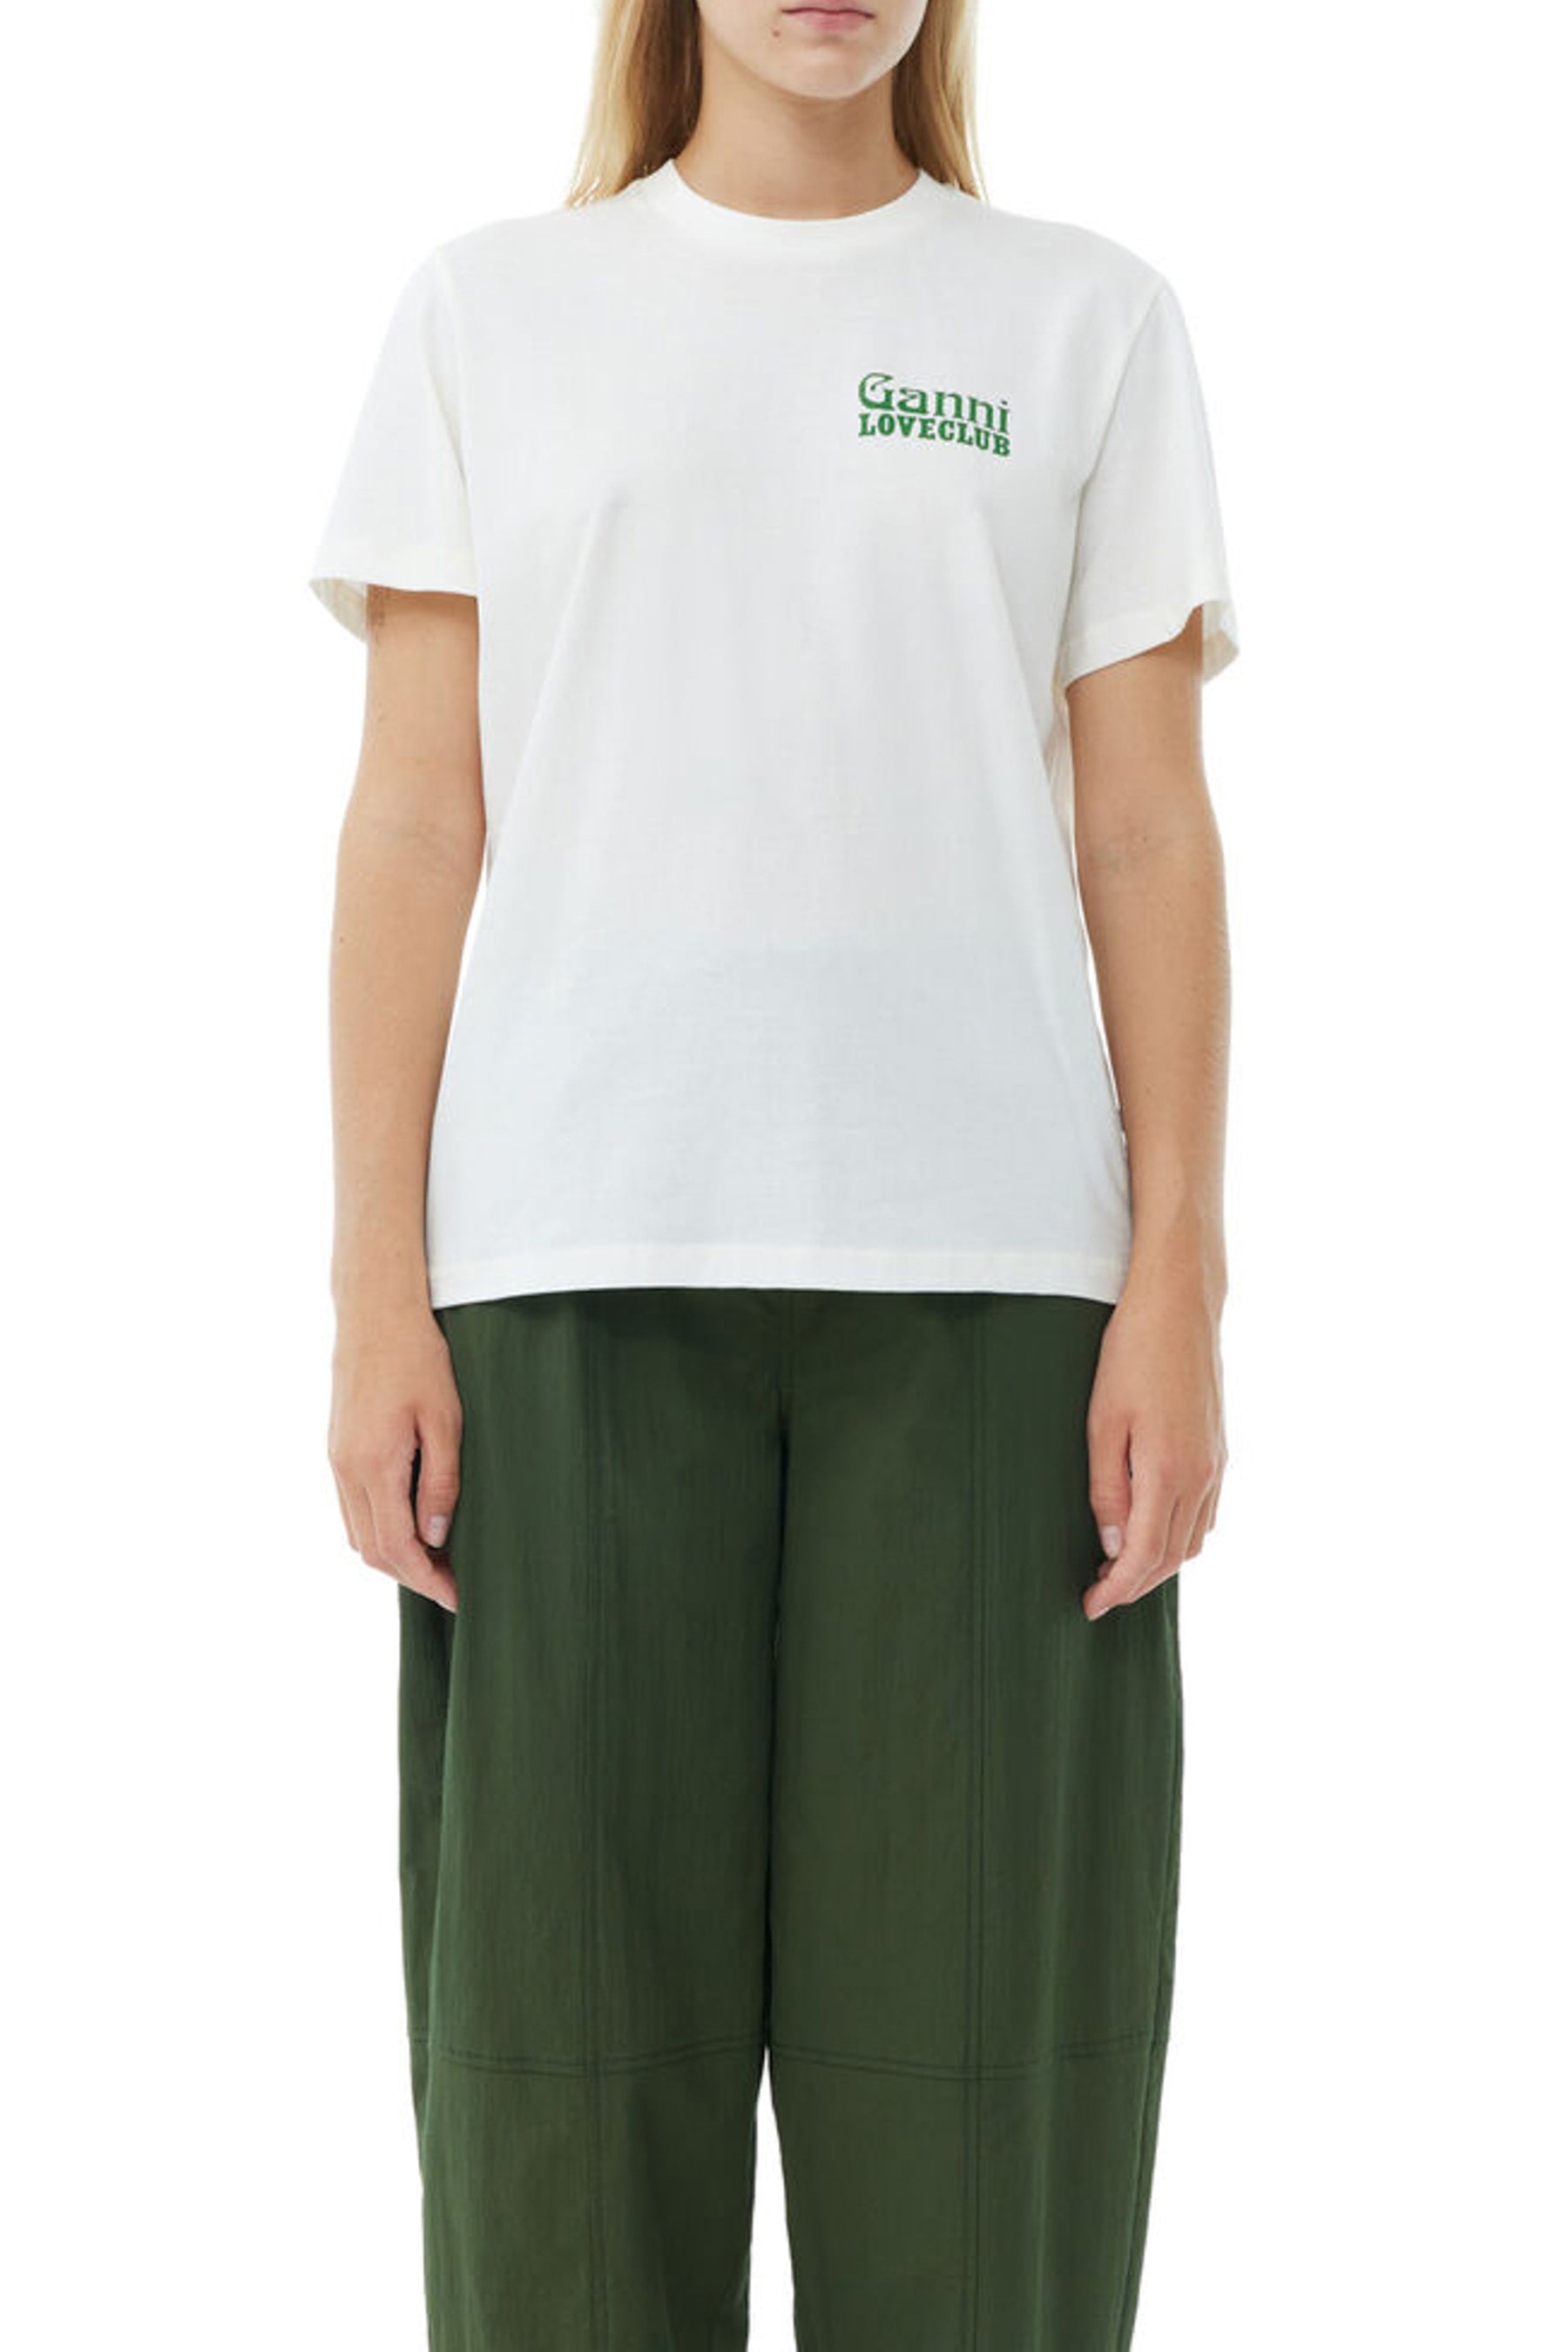 THIN JERSEY LOVECLUB RELAXED T-SHIRT / WHT